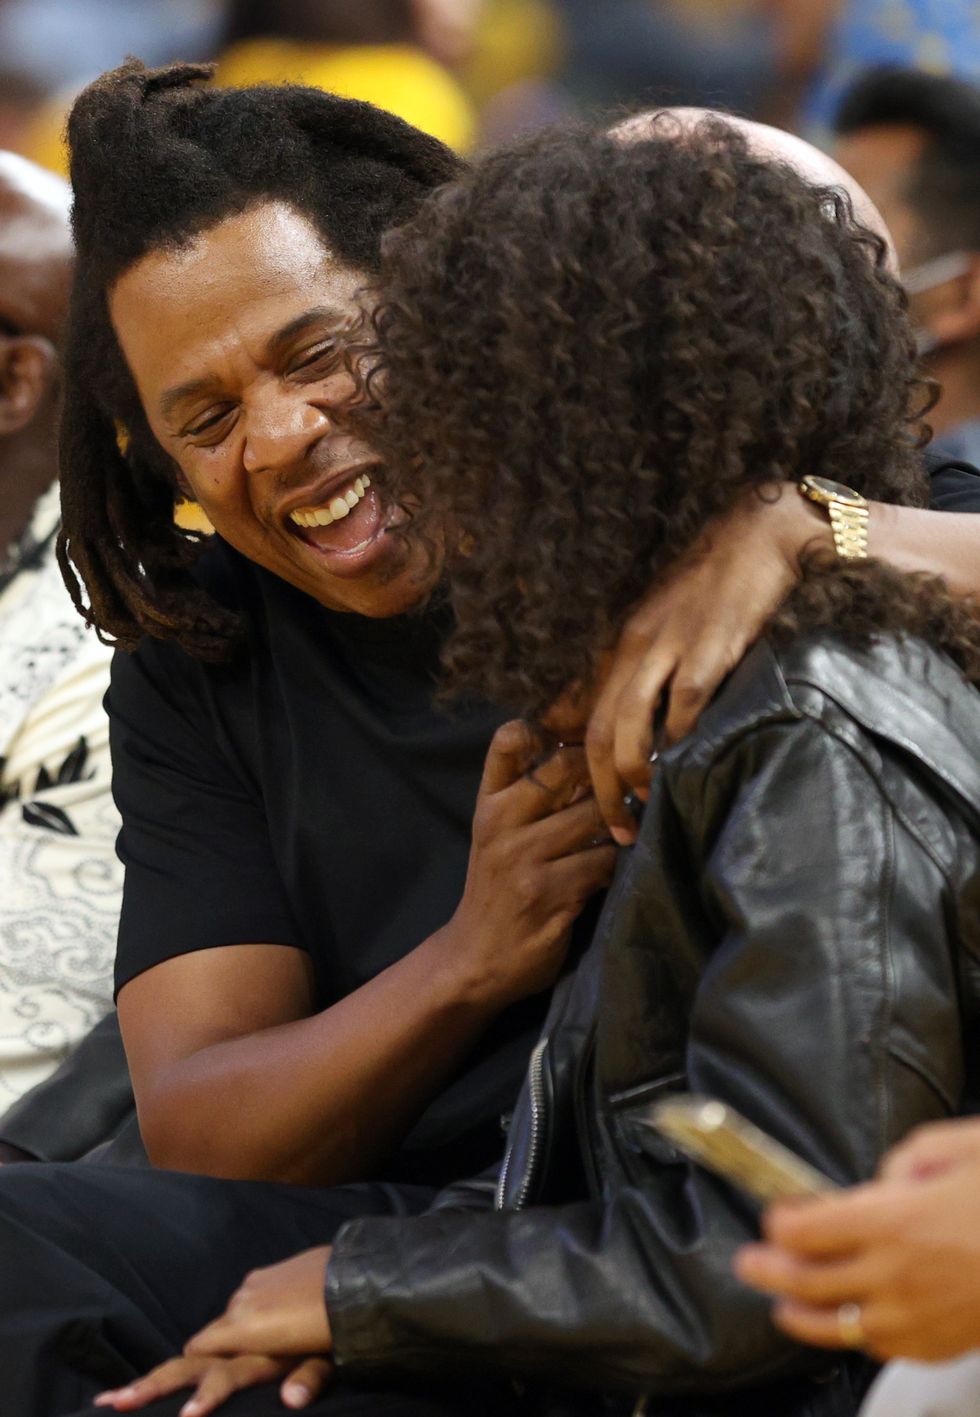 Jay-Z Gives Daughter Blue Ivy a Kiss on the Cheek at the NBA Finals